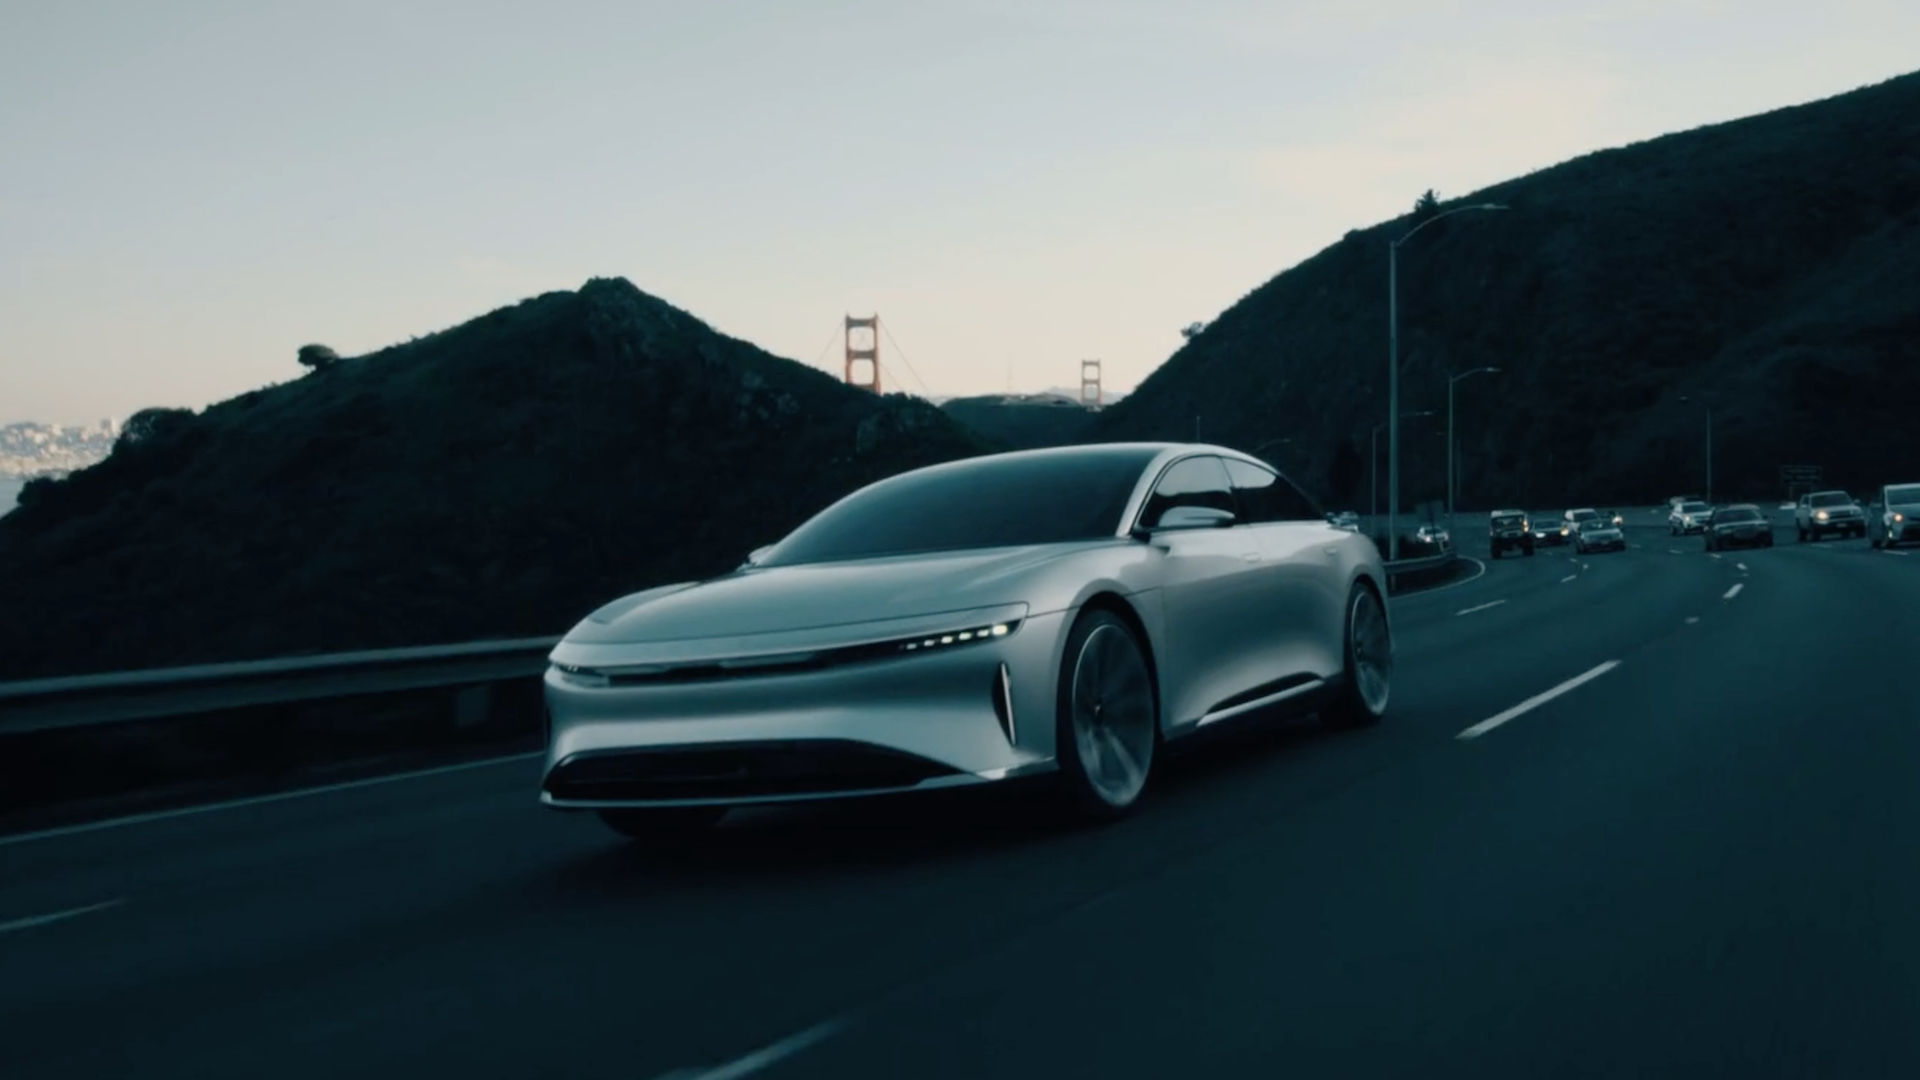 You Can Put a Deposit Down on Lucid Motors’s 1,000-HP Electric Car As of Now